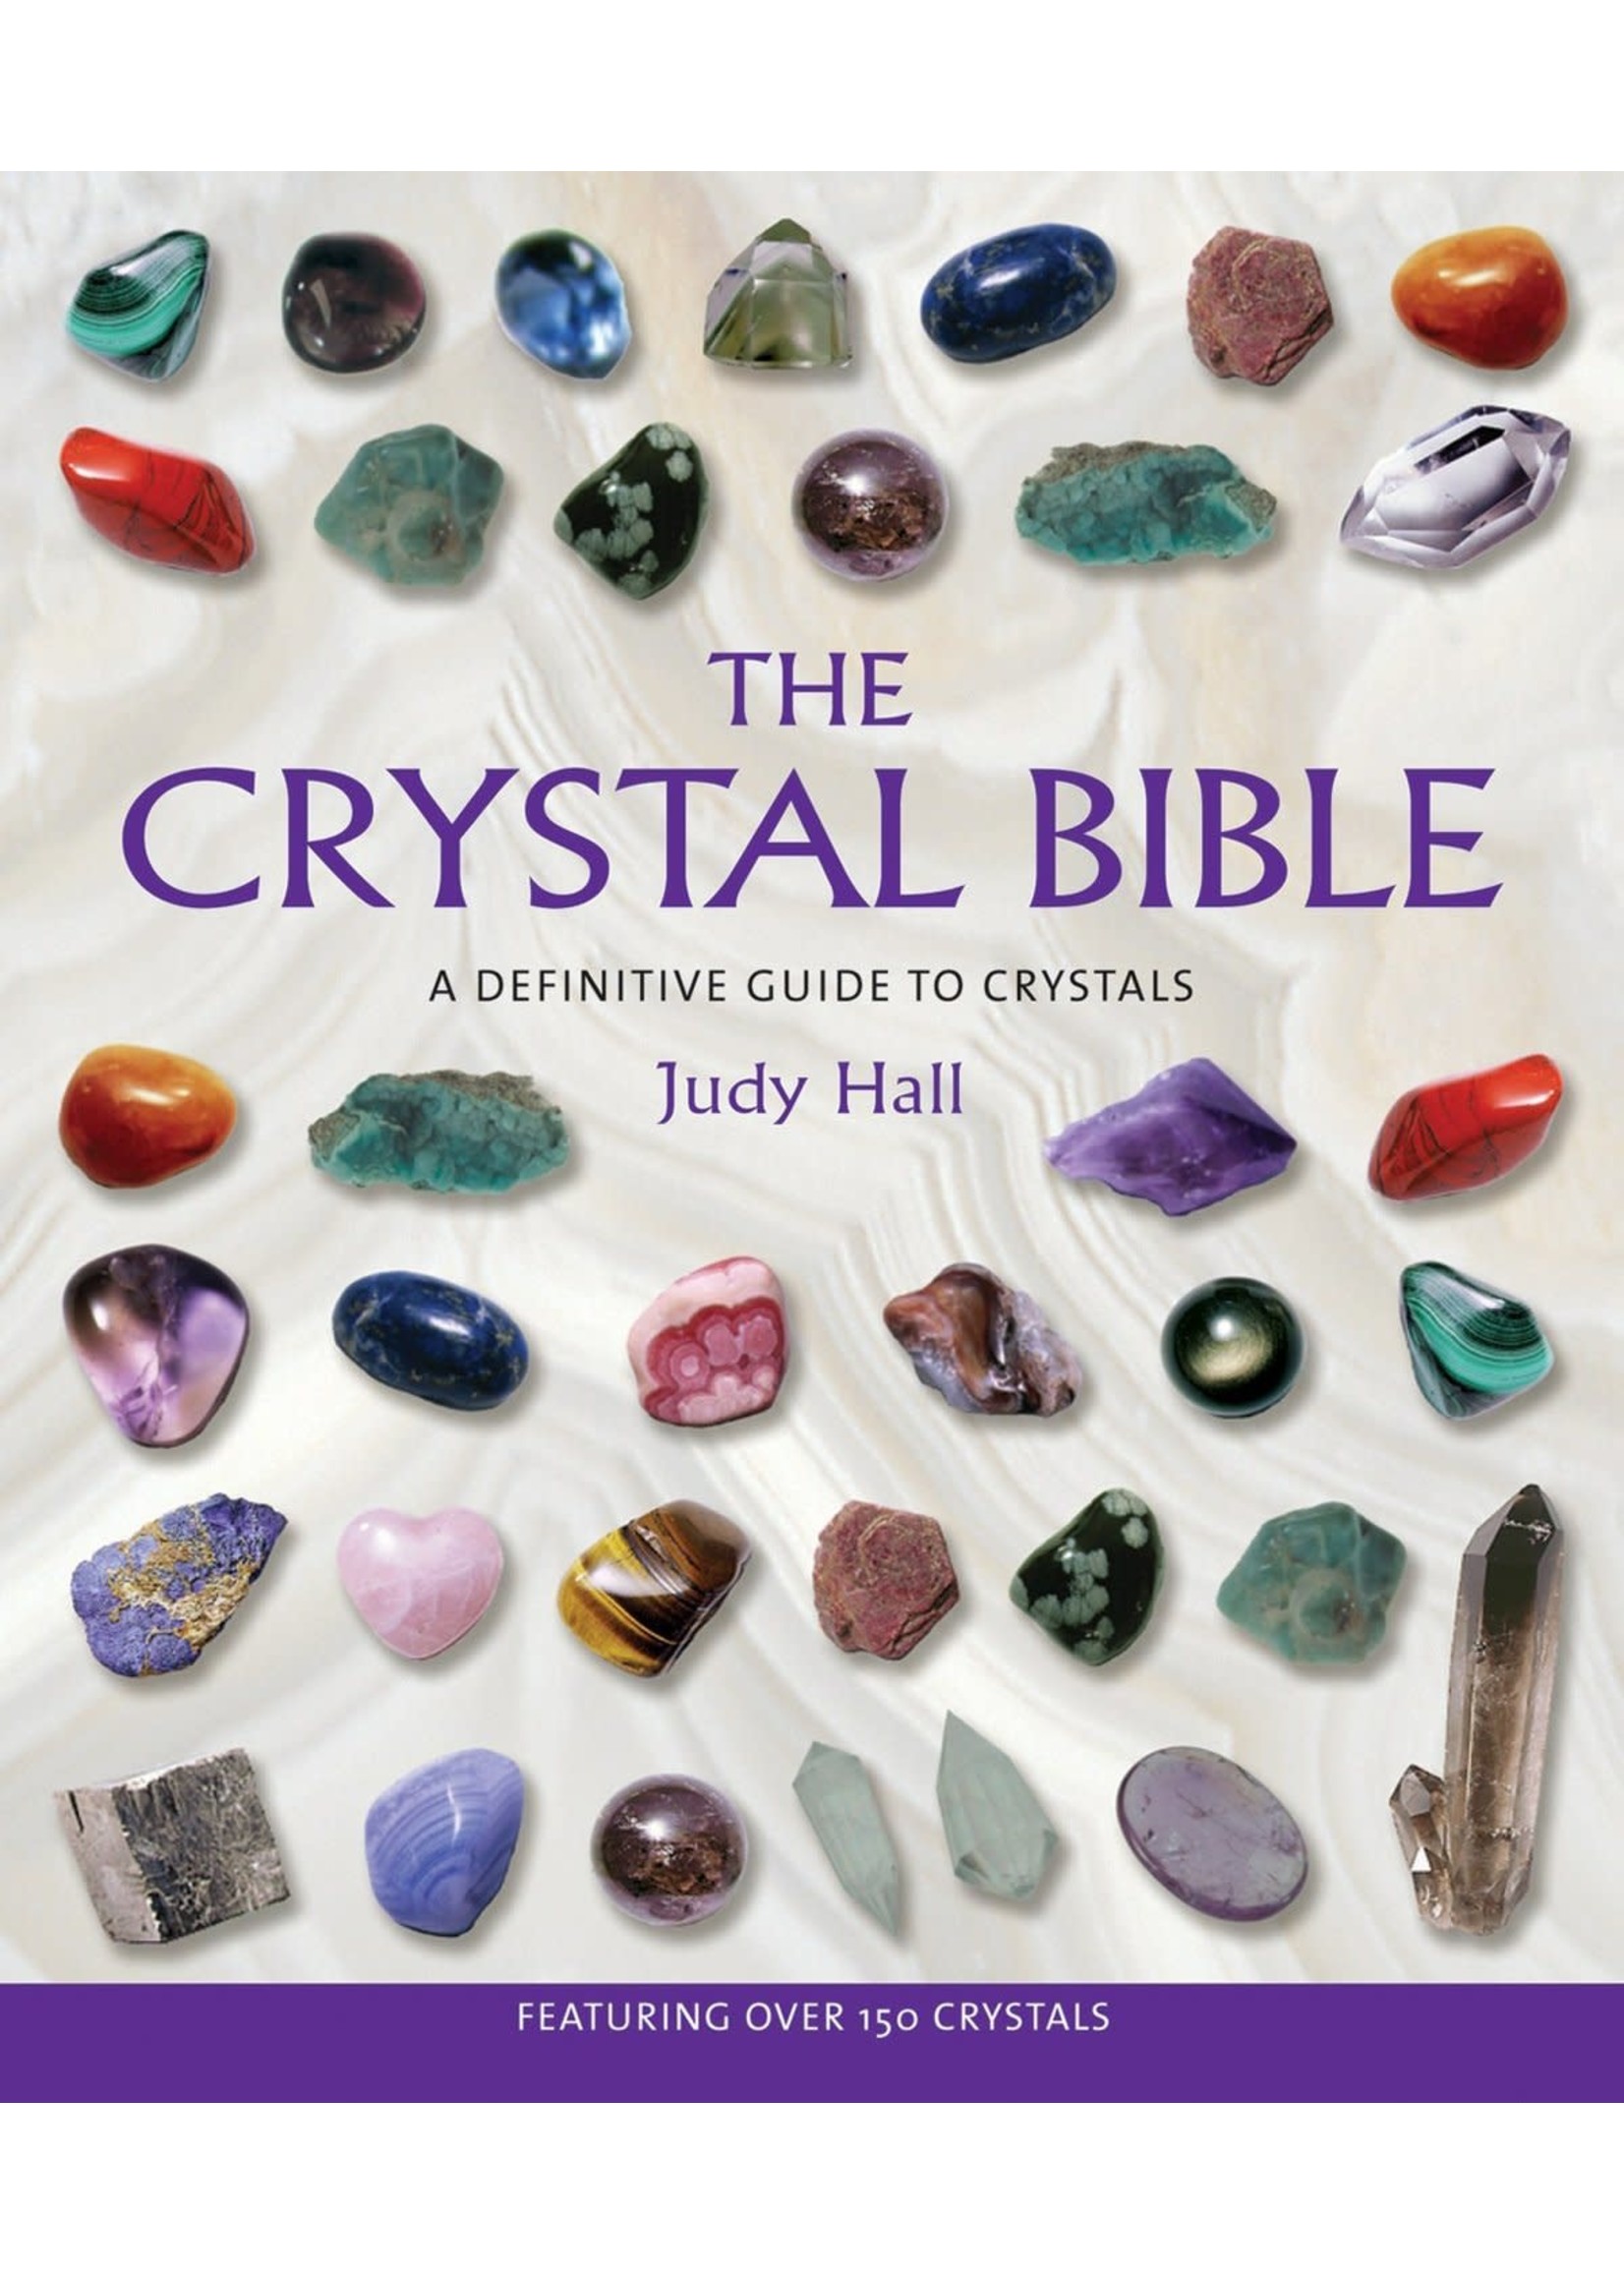 The Crystal Bible - A Definitive Guide to Crystals